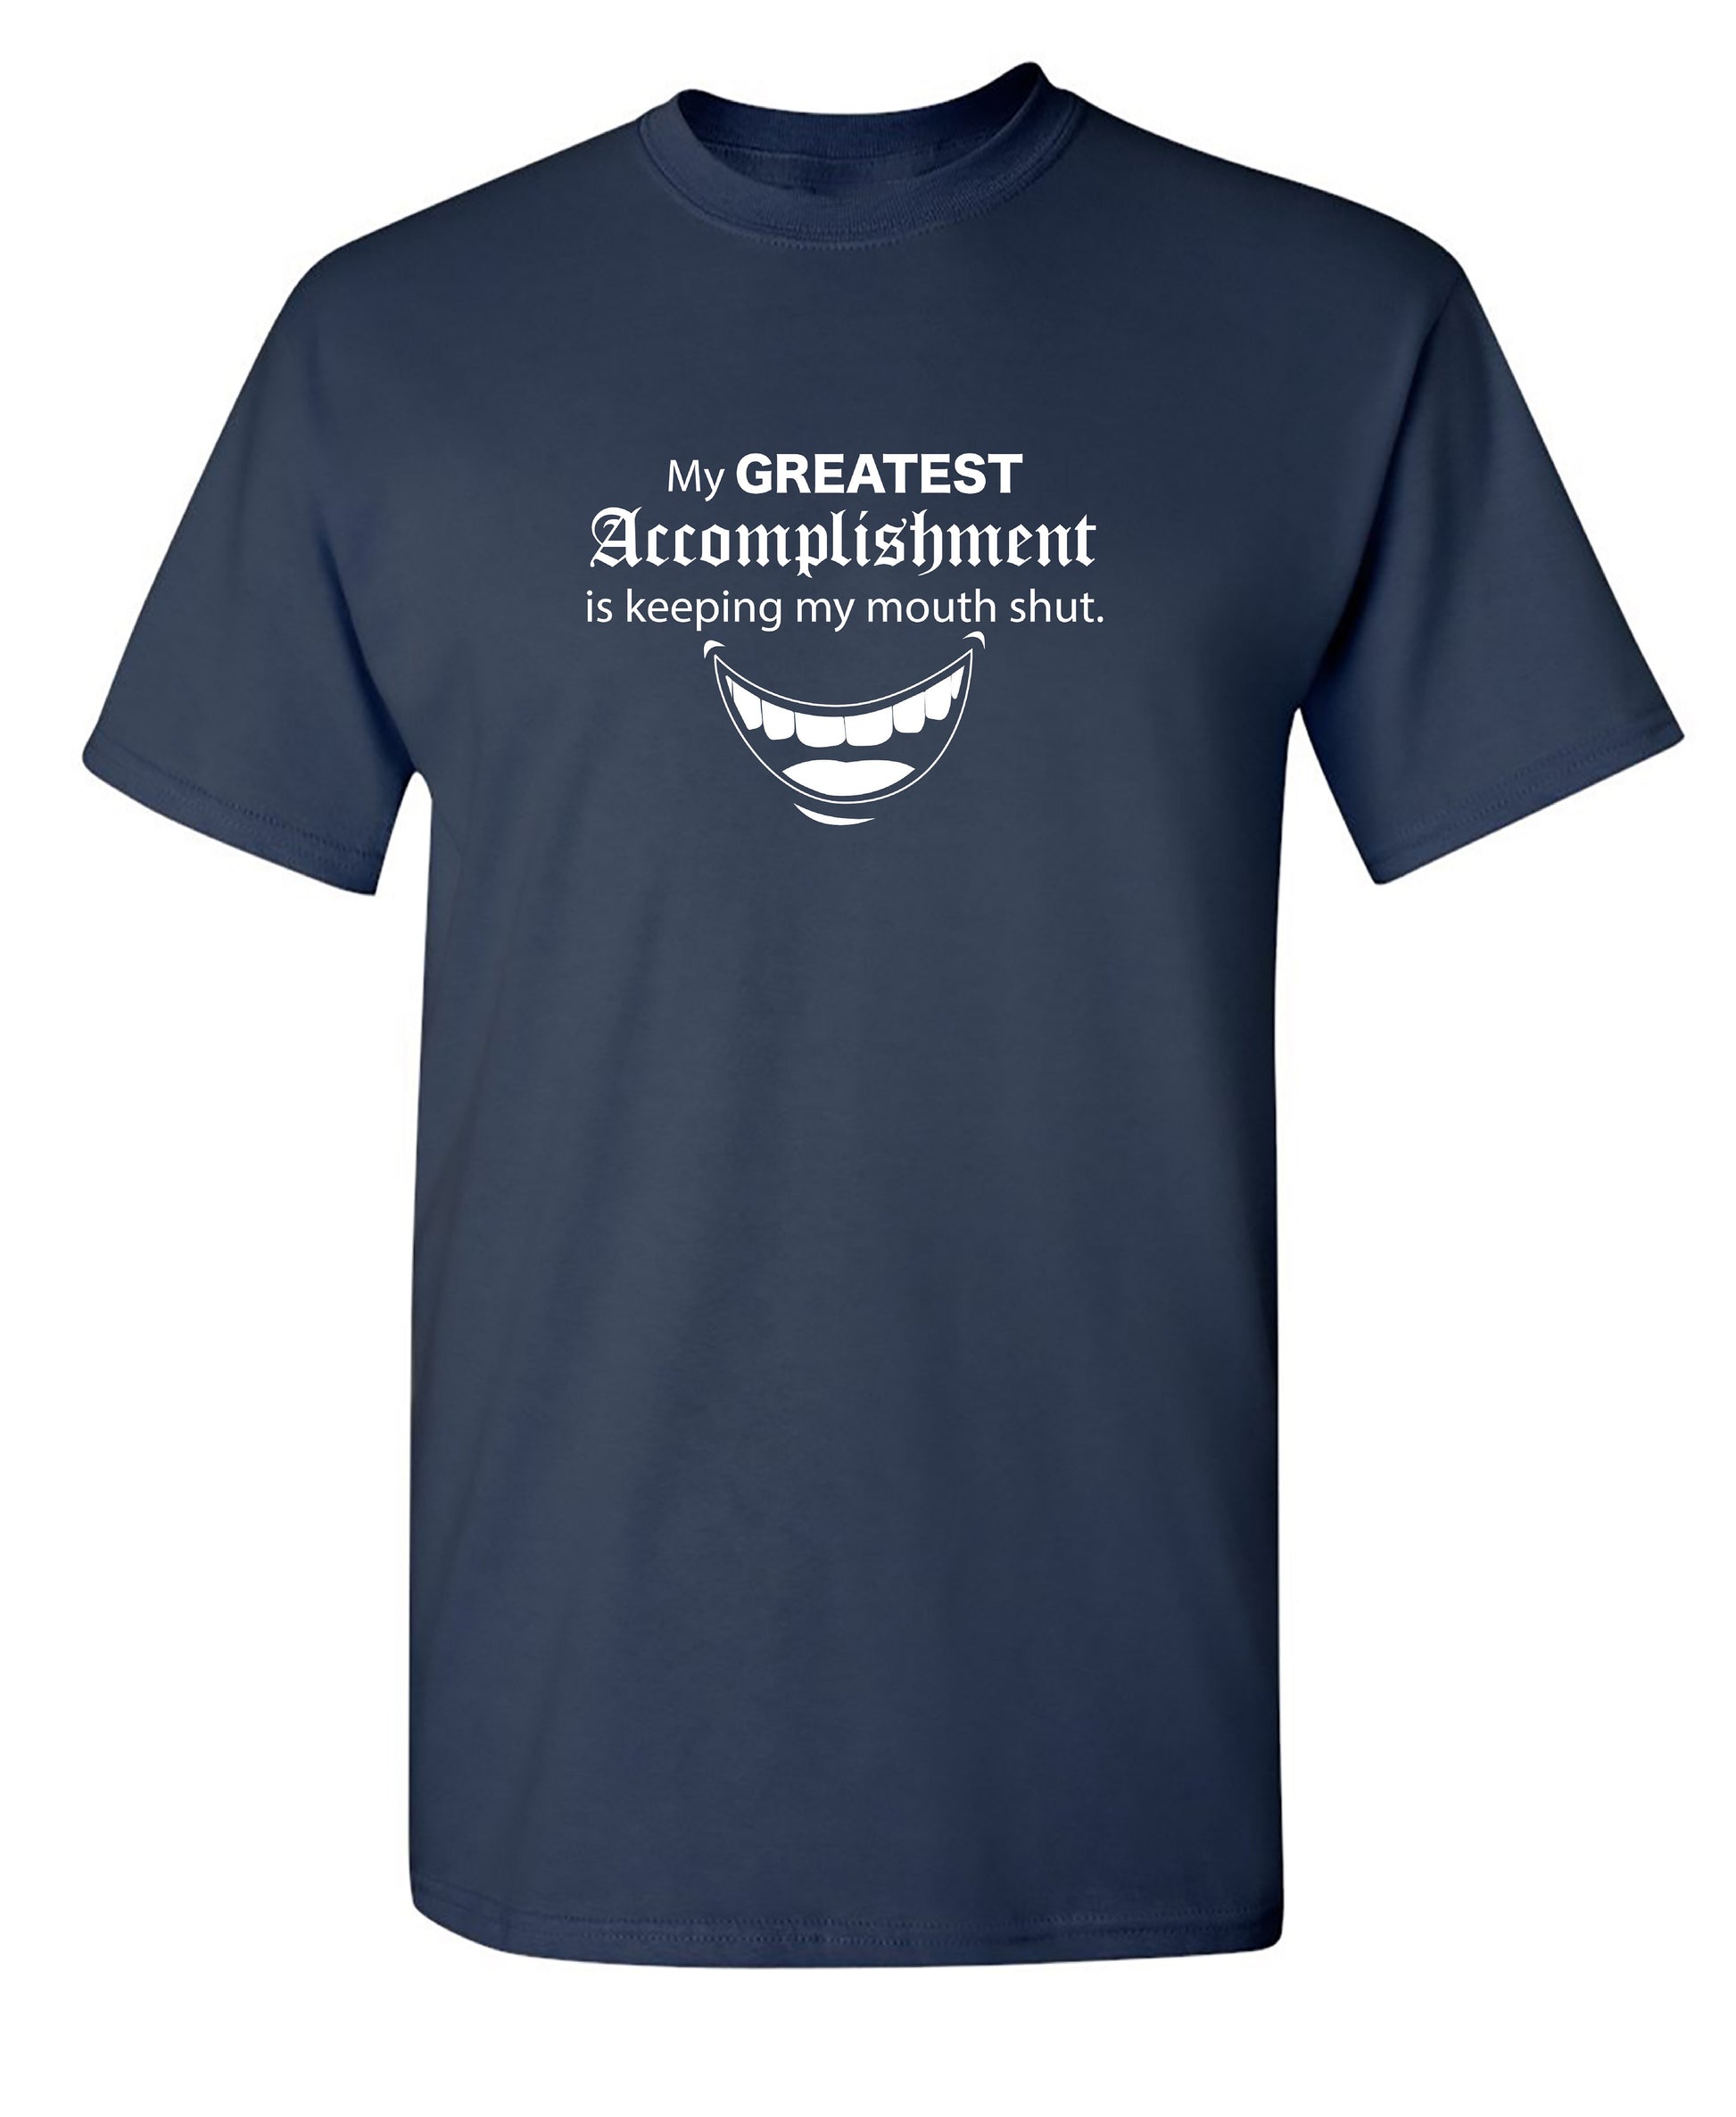 My Greatest Accomplishment Is Keeping My Mouth Shut - Funny T Shirts & Graphic Tees